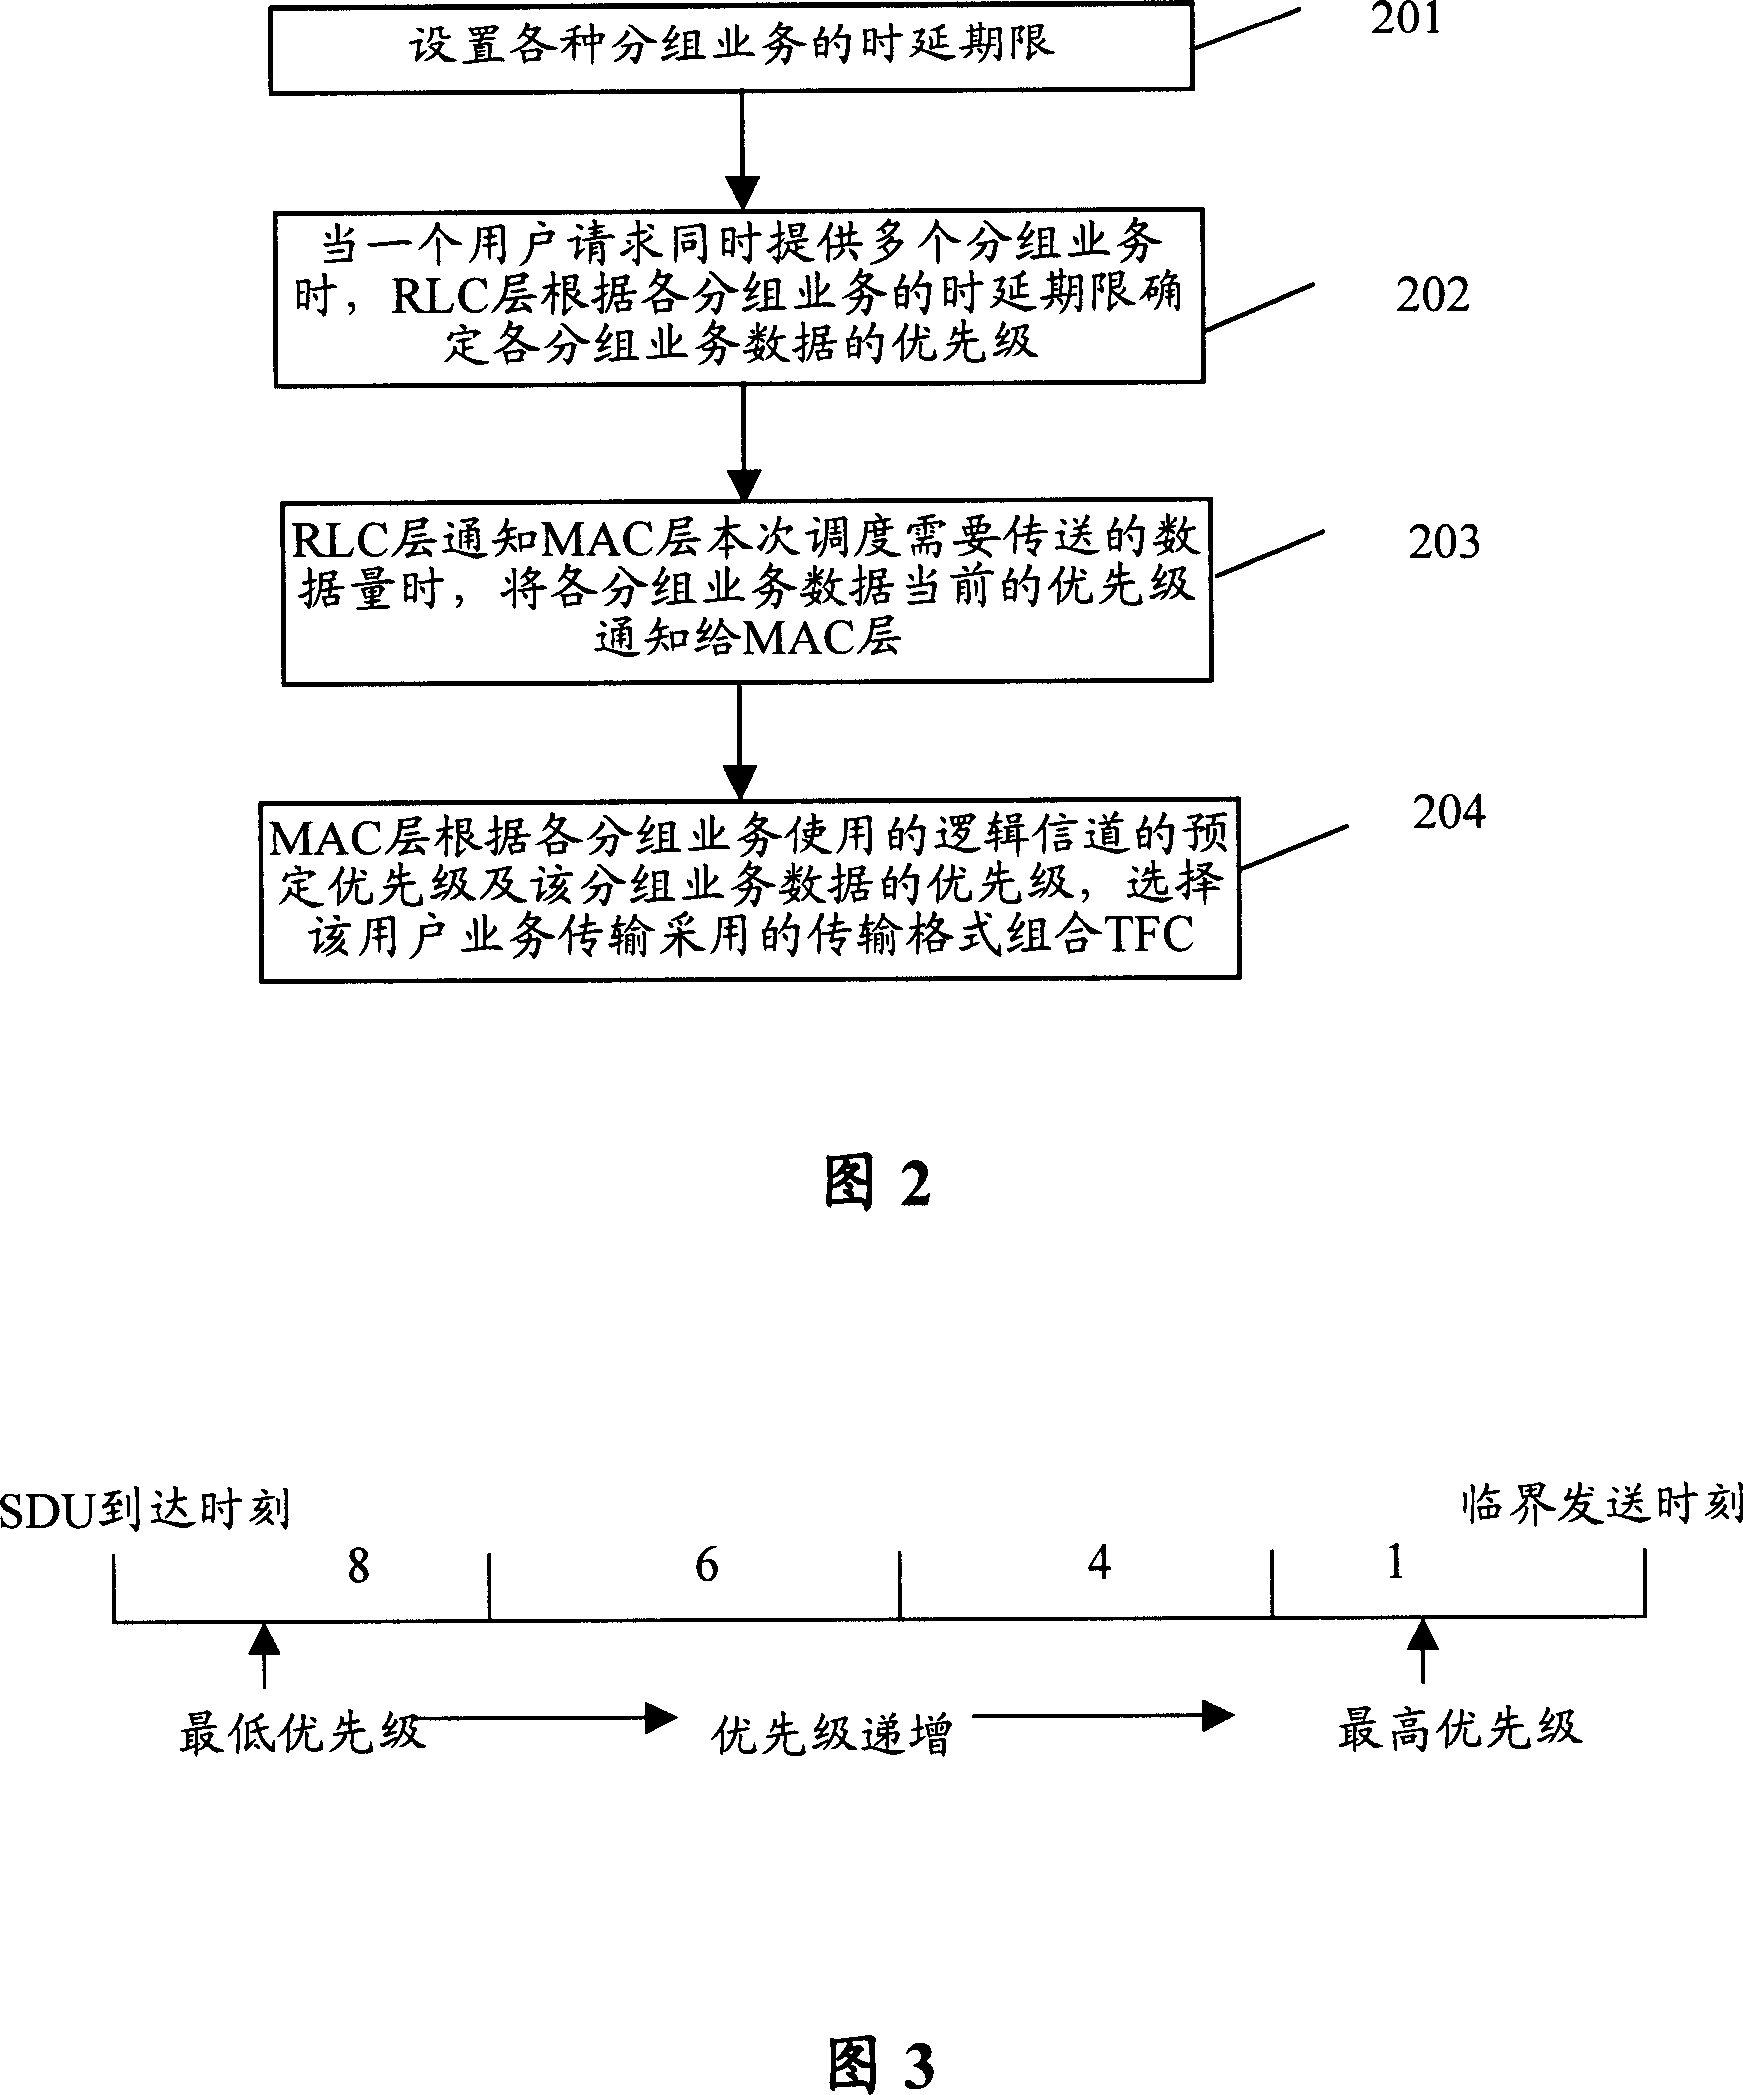 Packet service scheduling method in mobile communication system